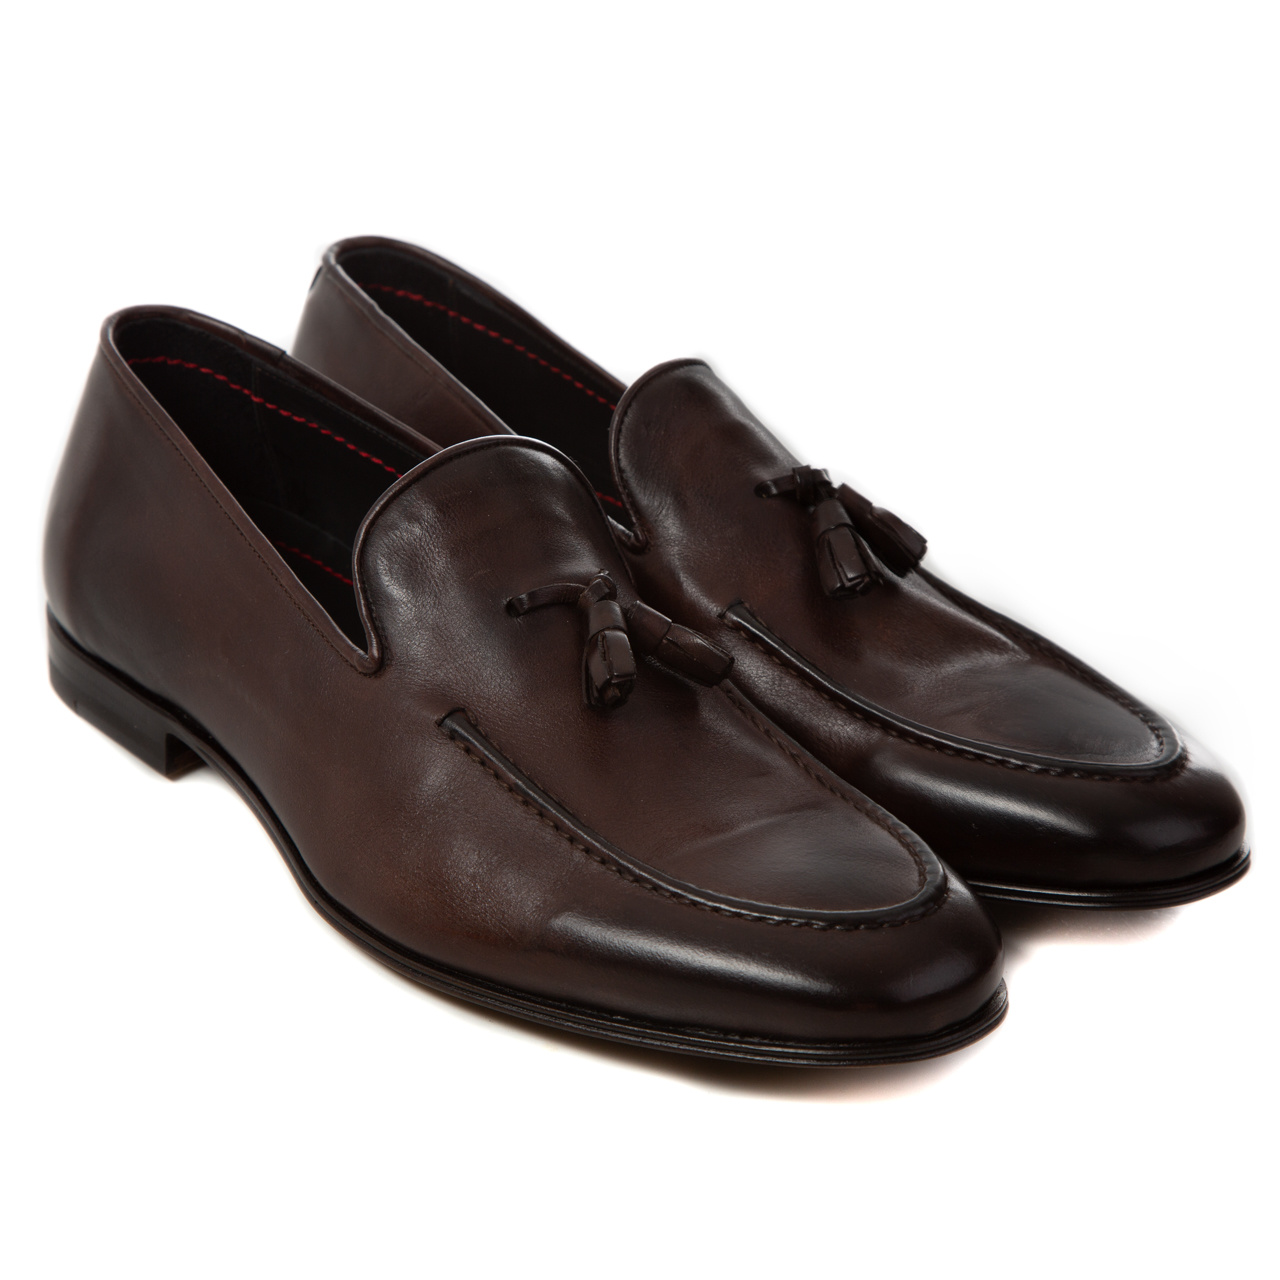 HANDMADE Moccasins calf leather - made Italy PM